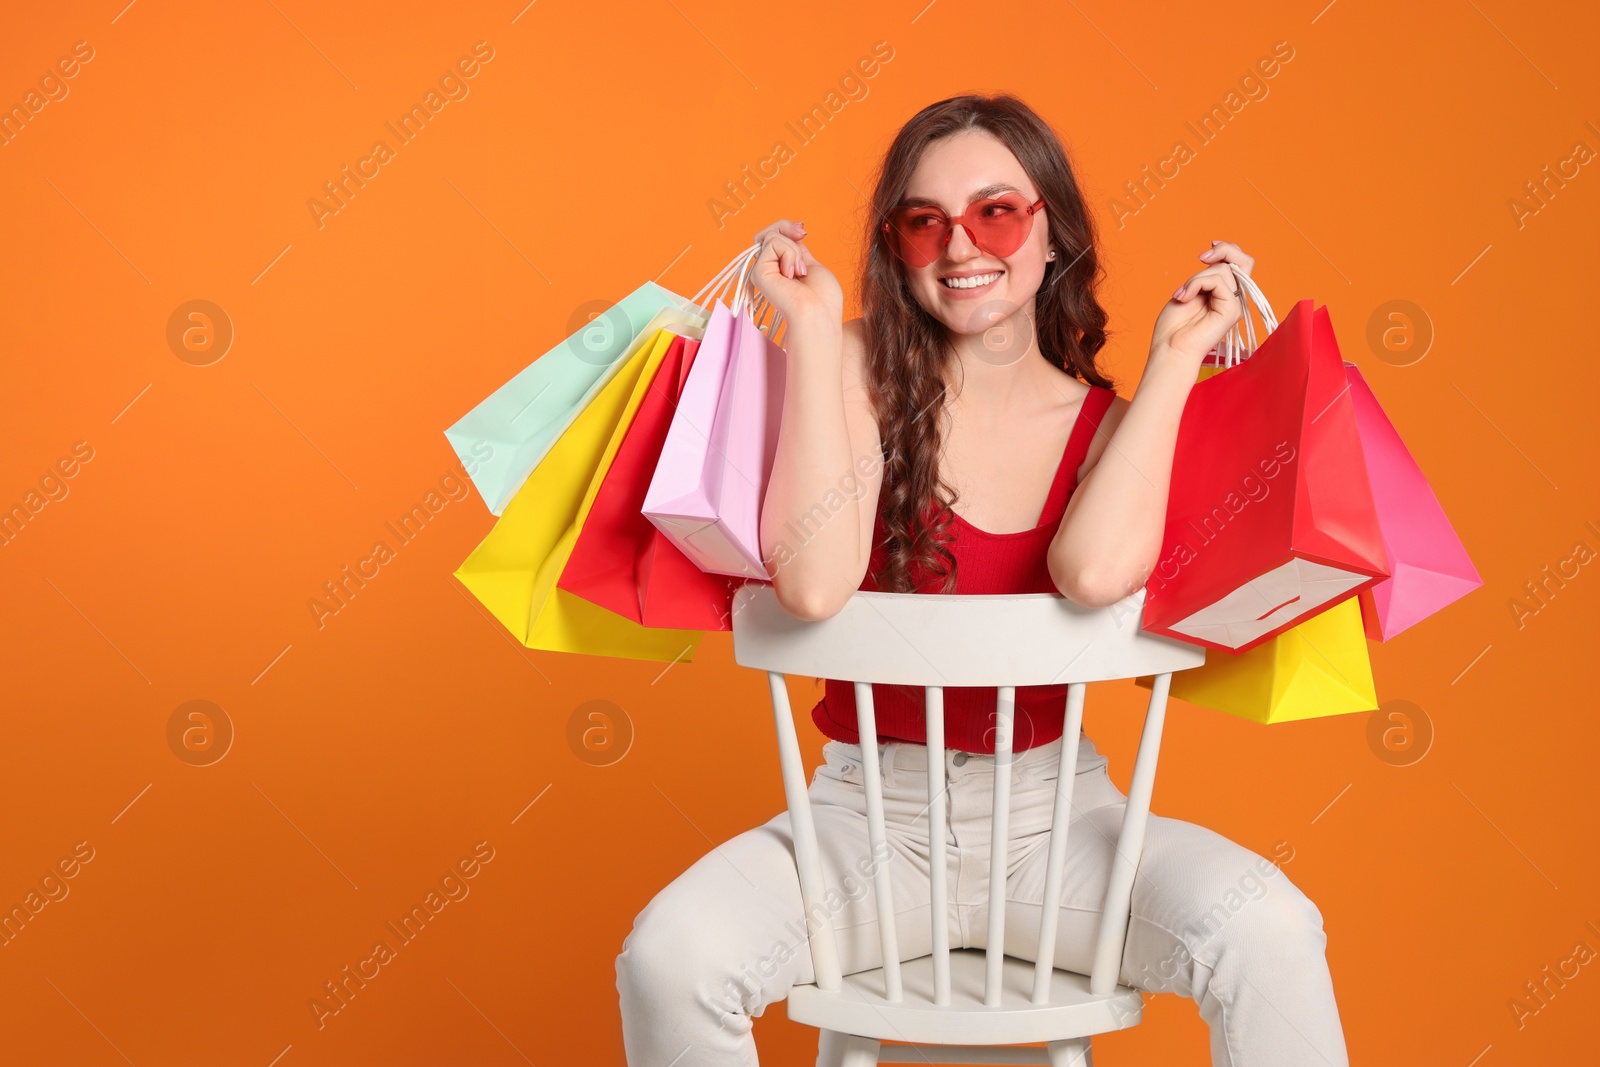 Photo of Happy woman in stylish sunglasses with many colorful shopping bags on chair against orange background